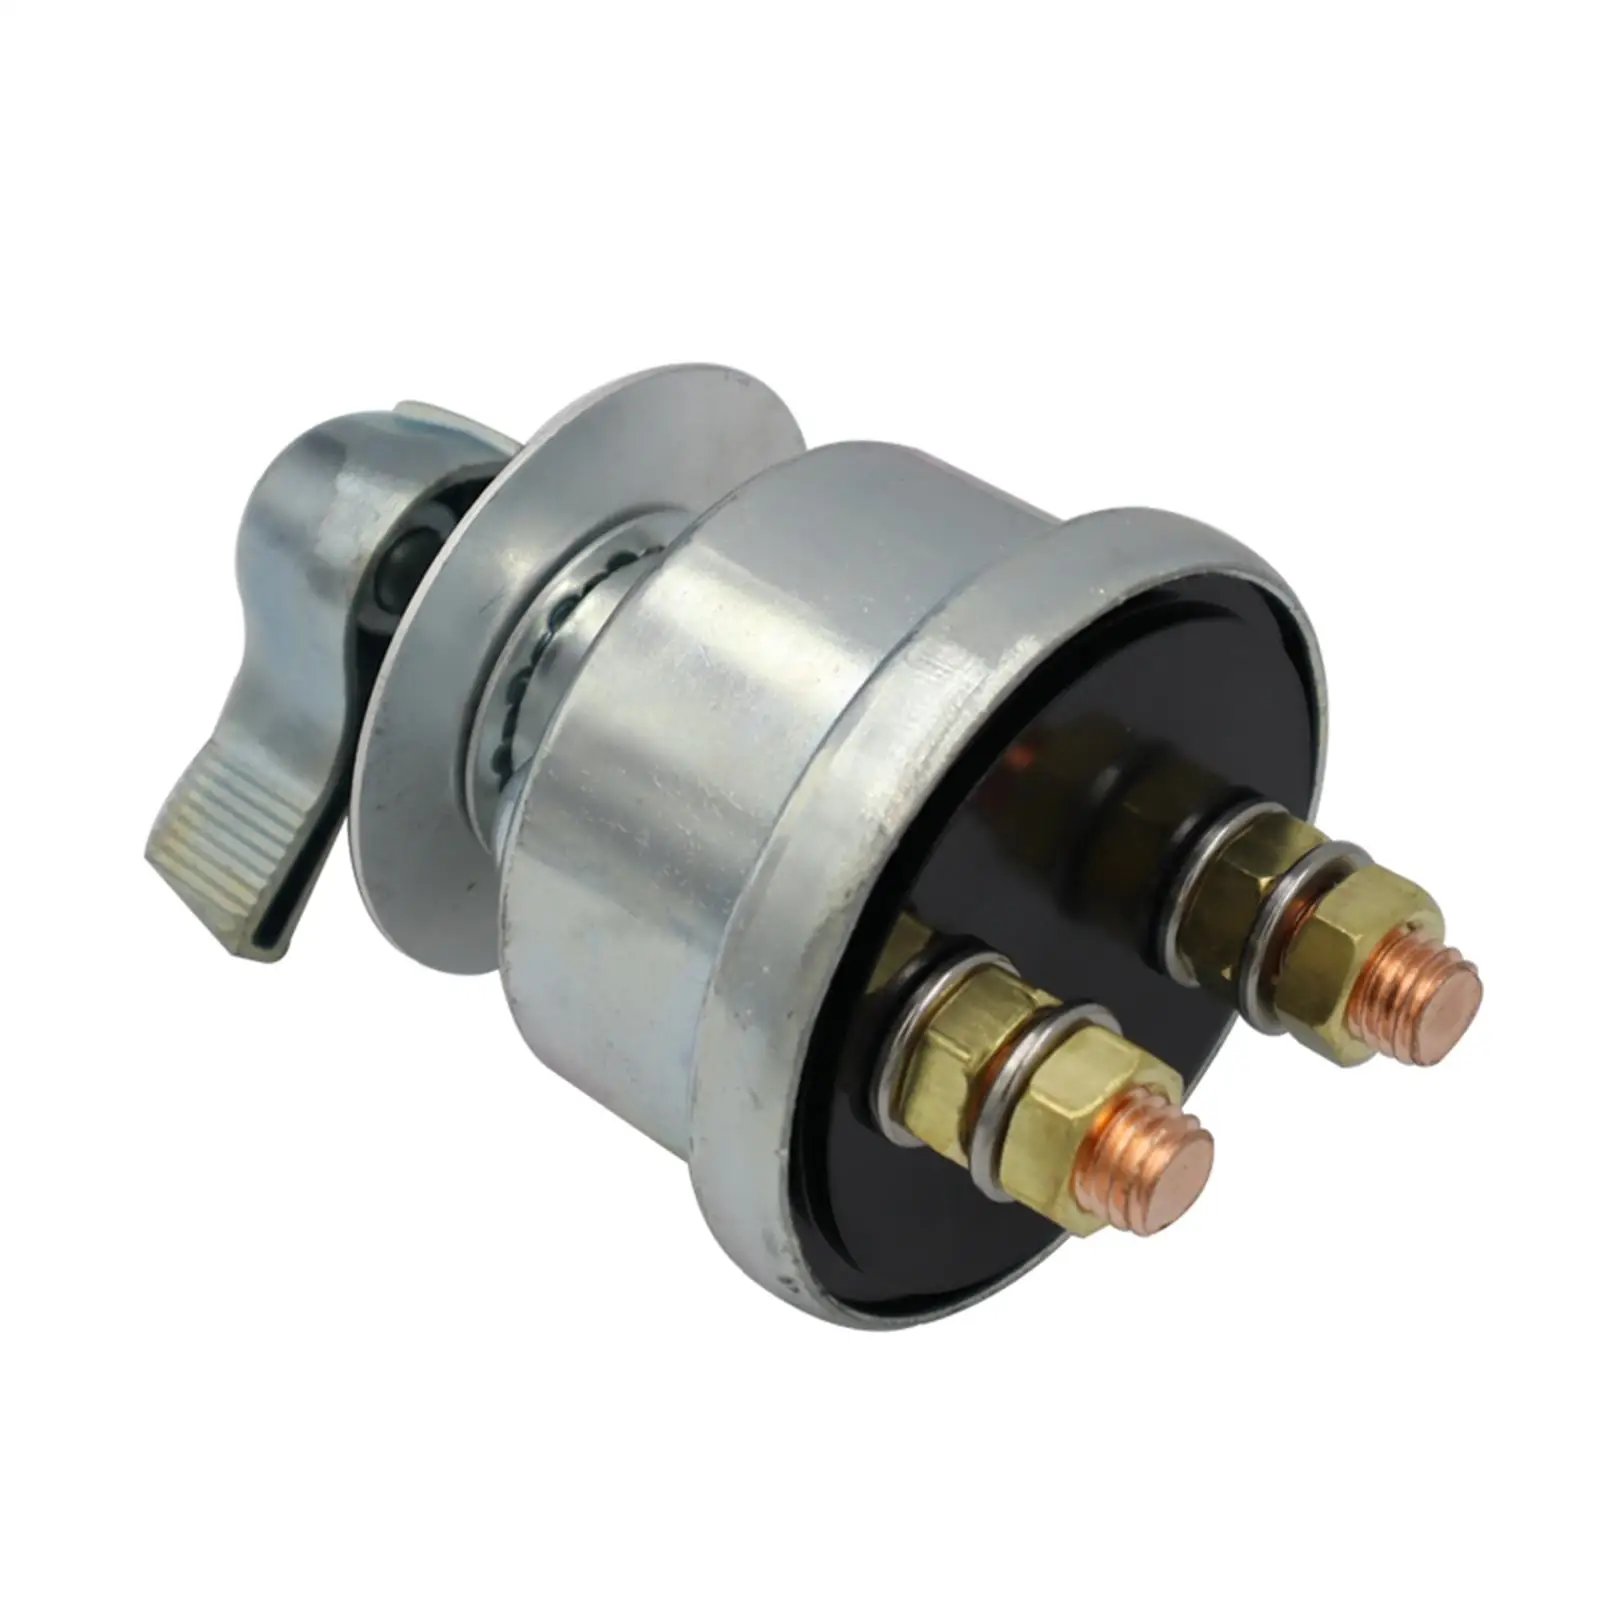 Disconnect Switch, Aluminum Alloy,   Isolator, Cut Off Switch,